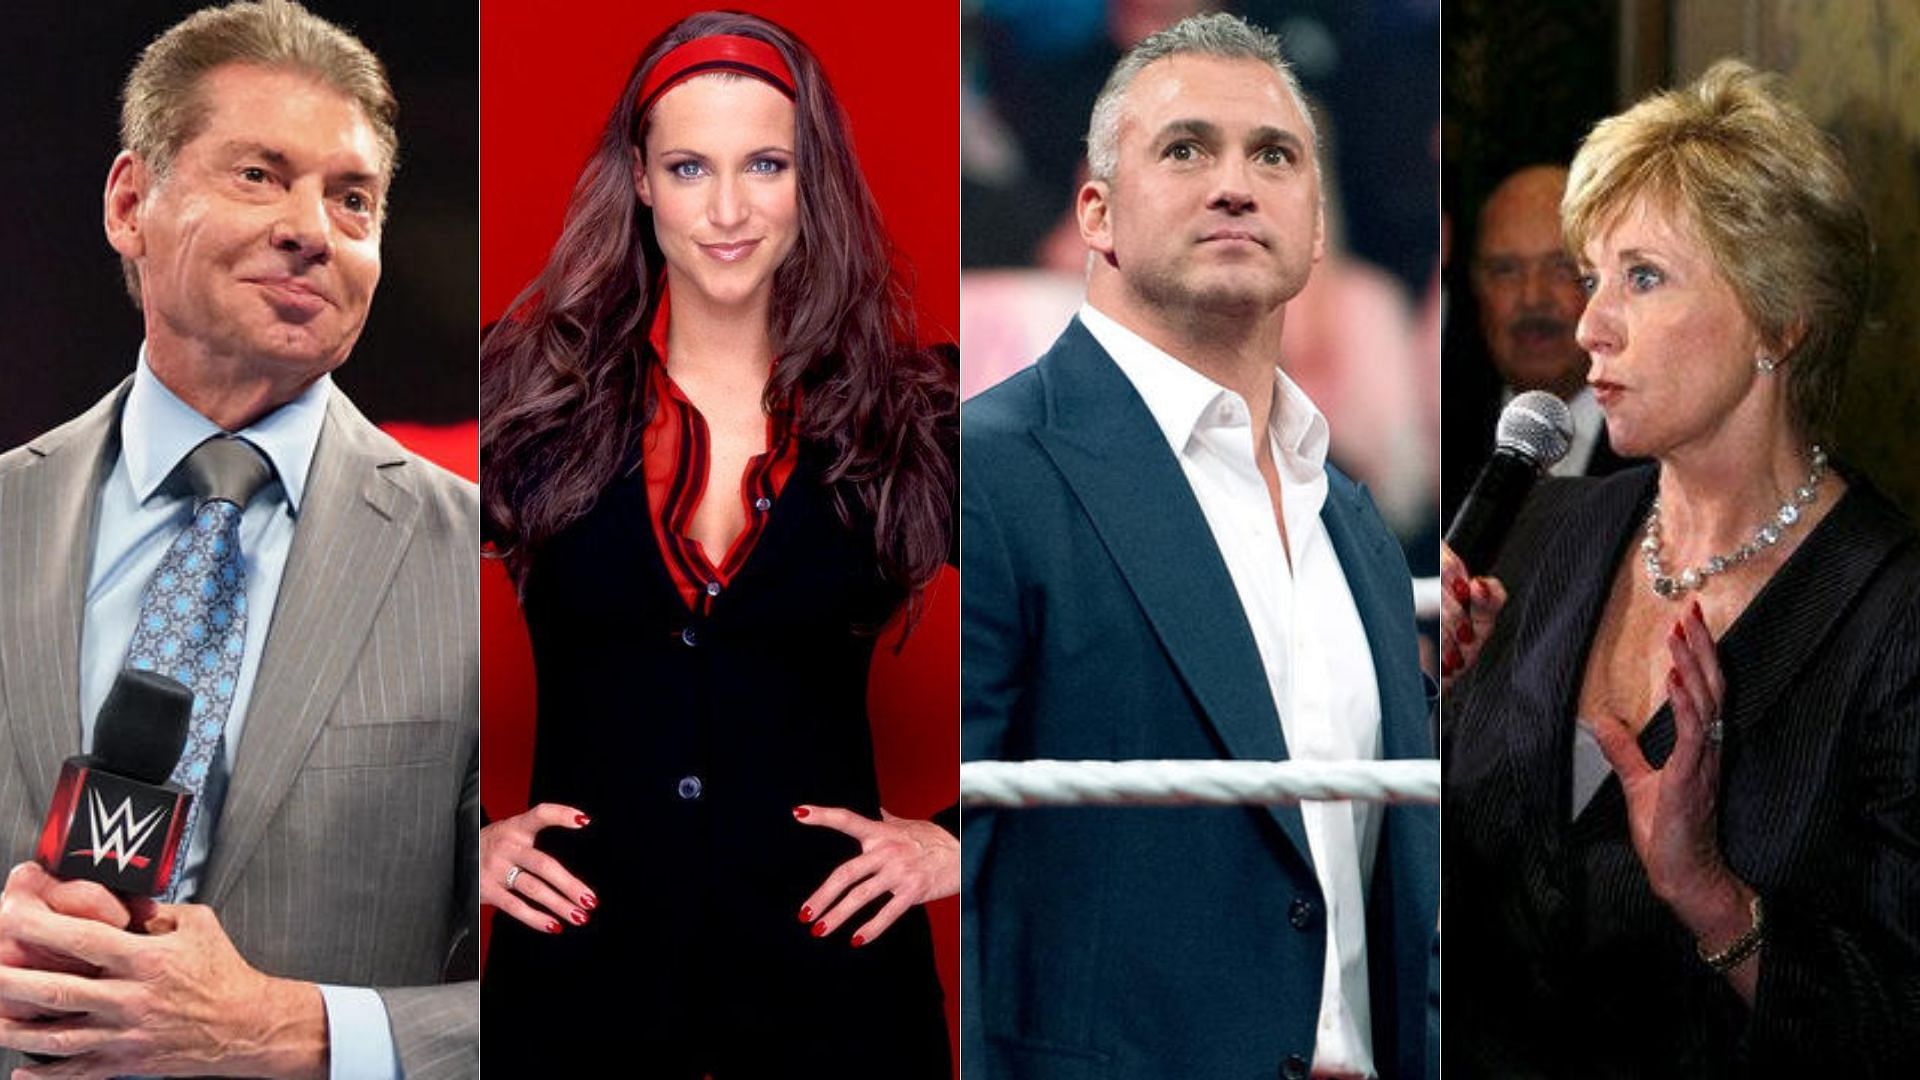 McMahon family (left to right): Vince, Stephanie, Shane, and Linda